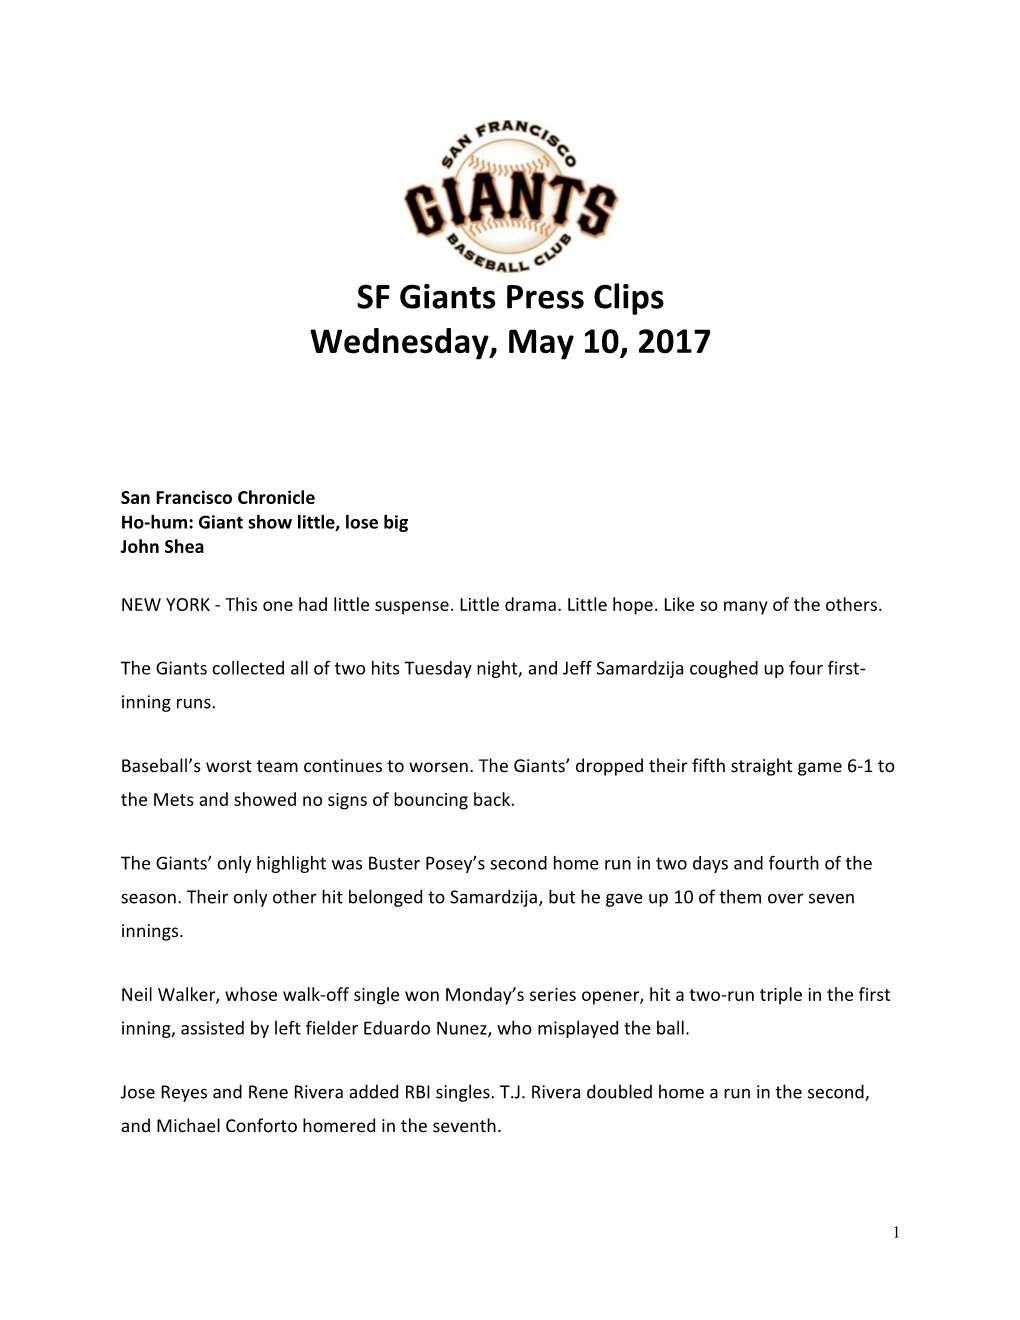 SF Giants Press Clips Wednesday, May 10, 2017